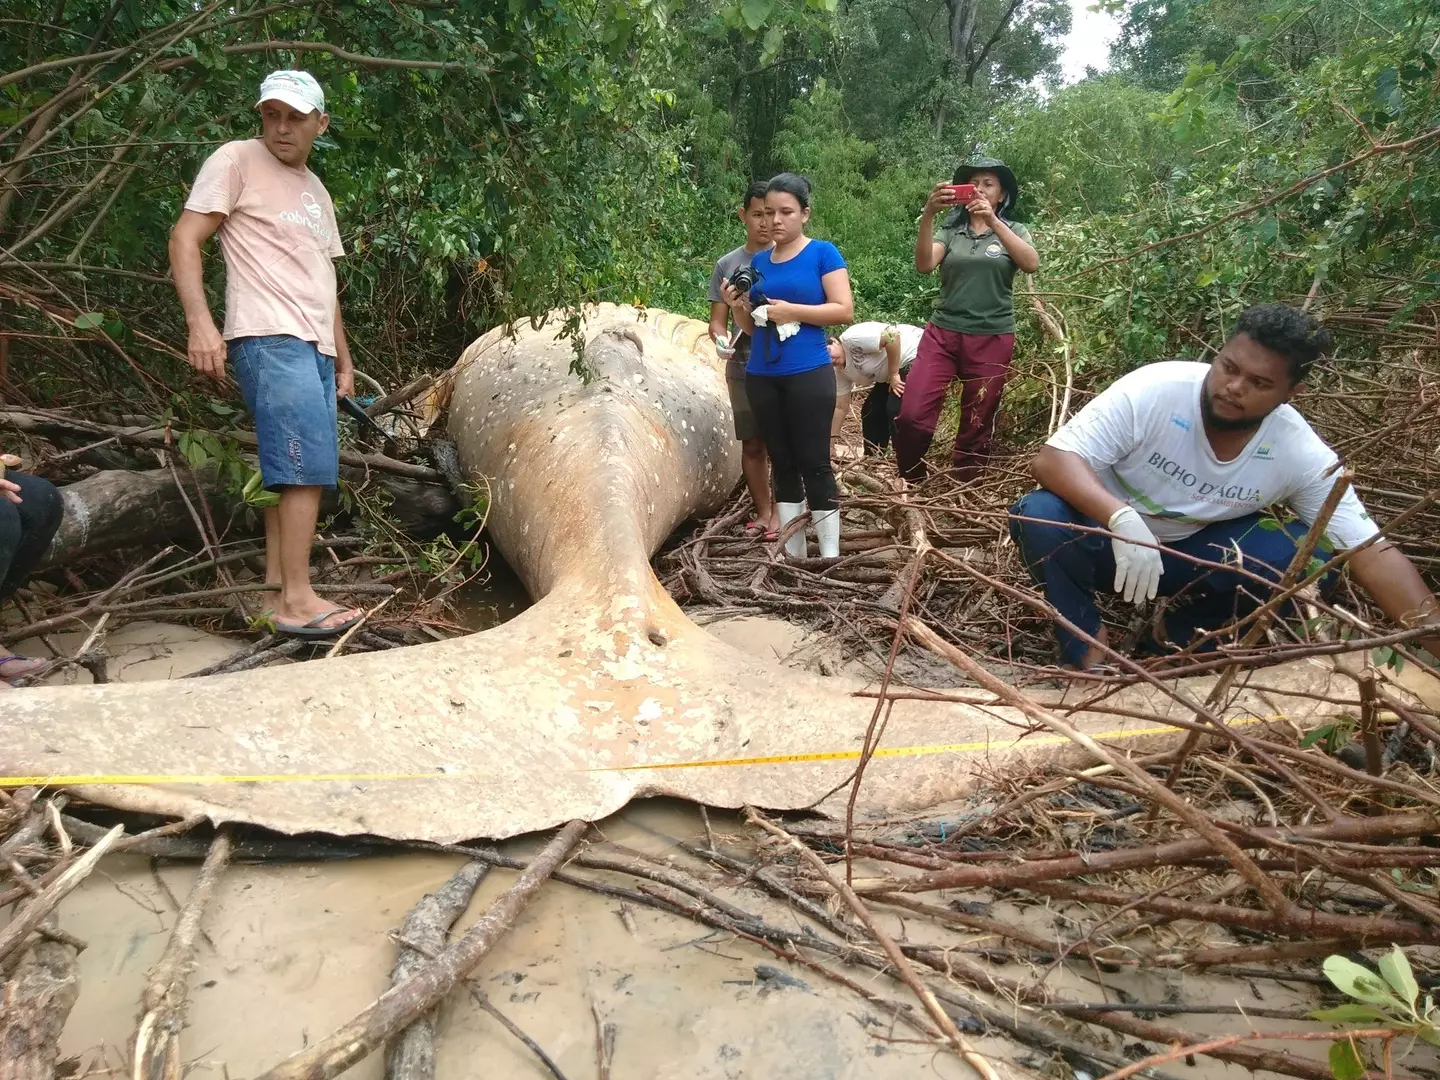 The dead whale was found in the Amazon Rainforest.